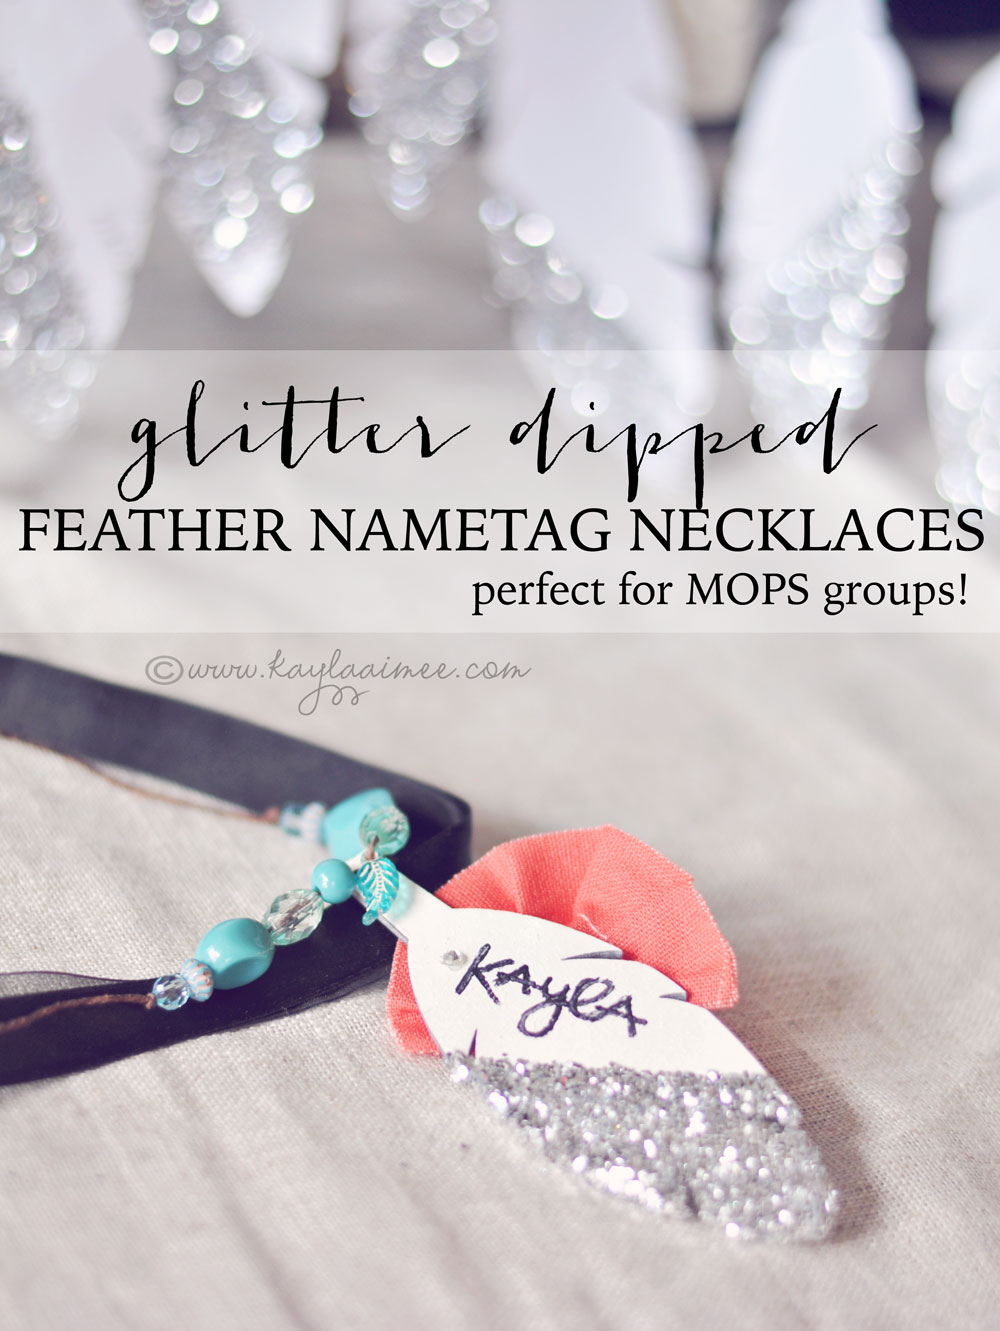 Glitter Dipped Feather Nametag Necklaces For MOPS